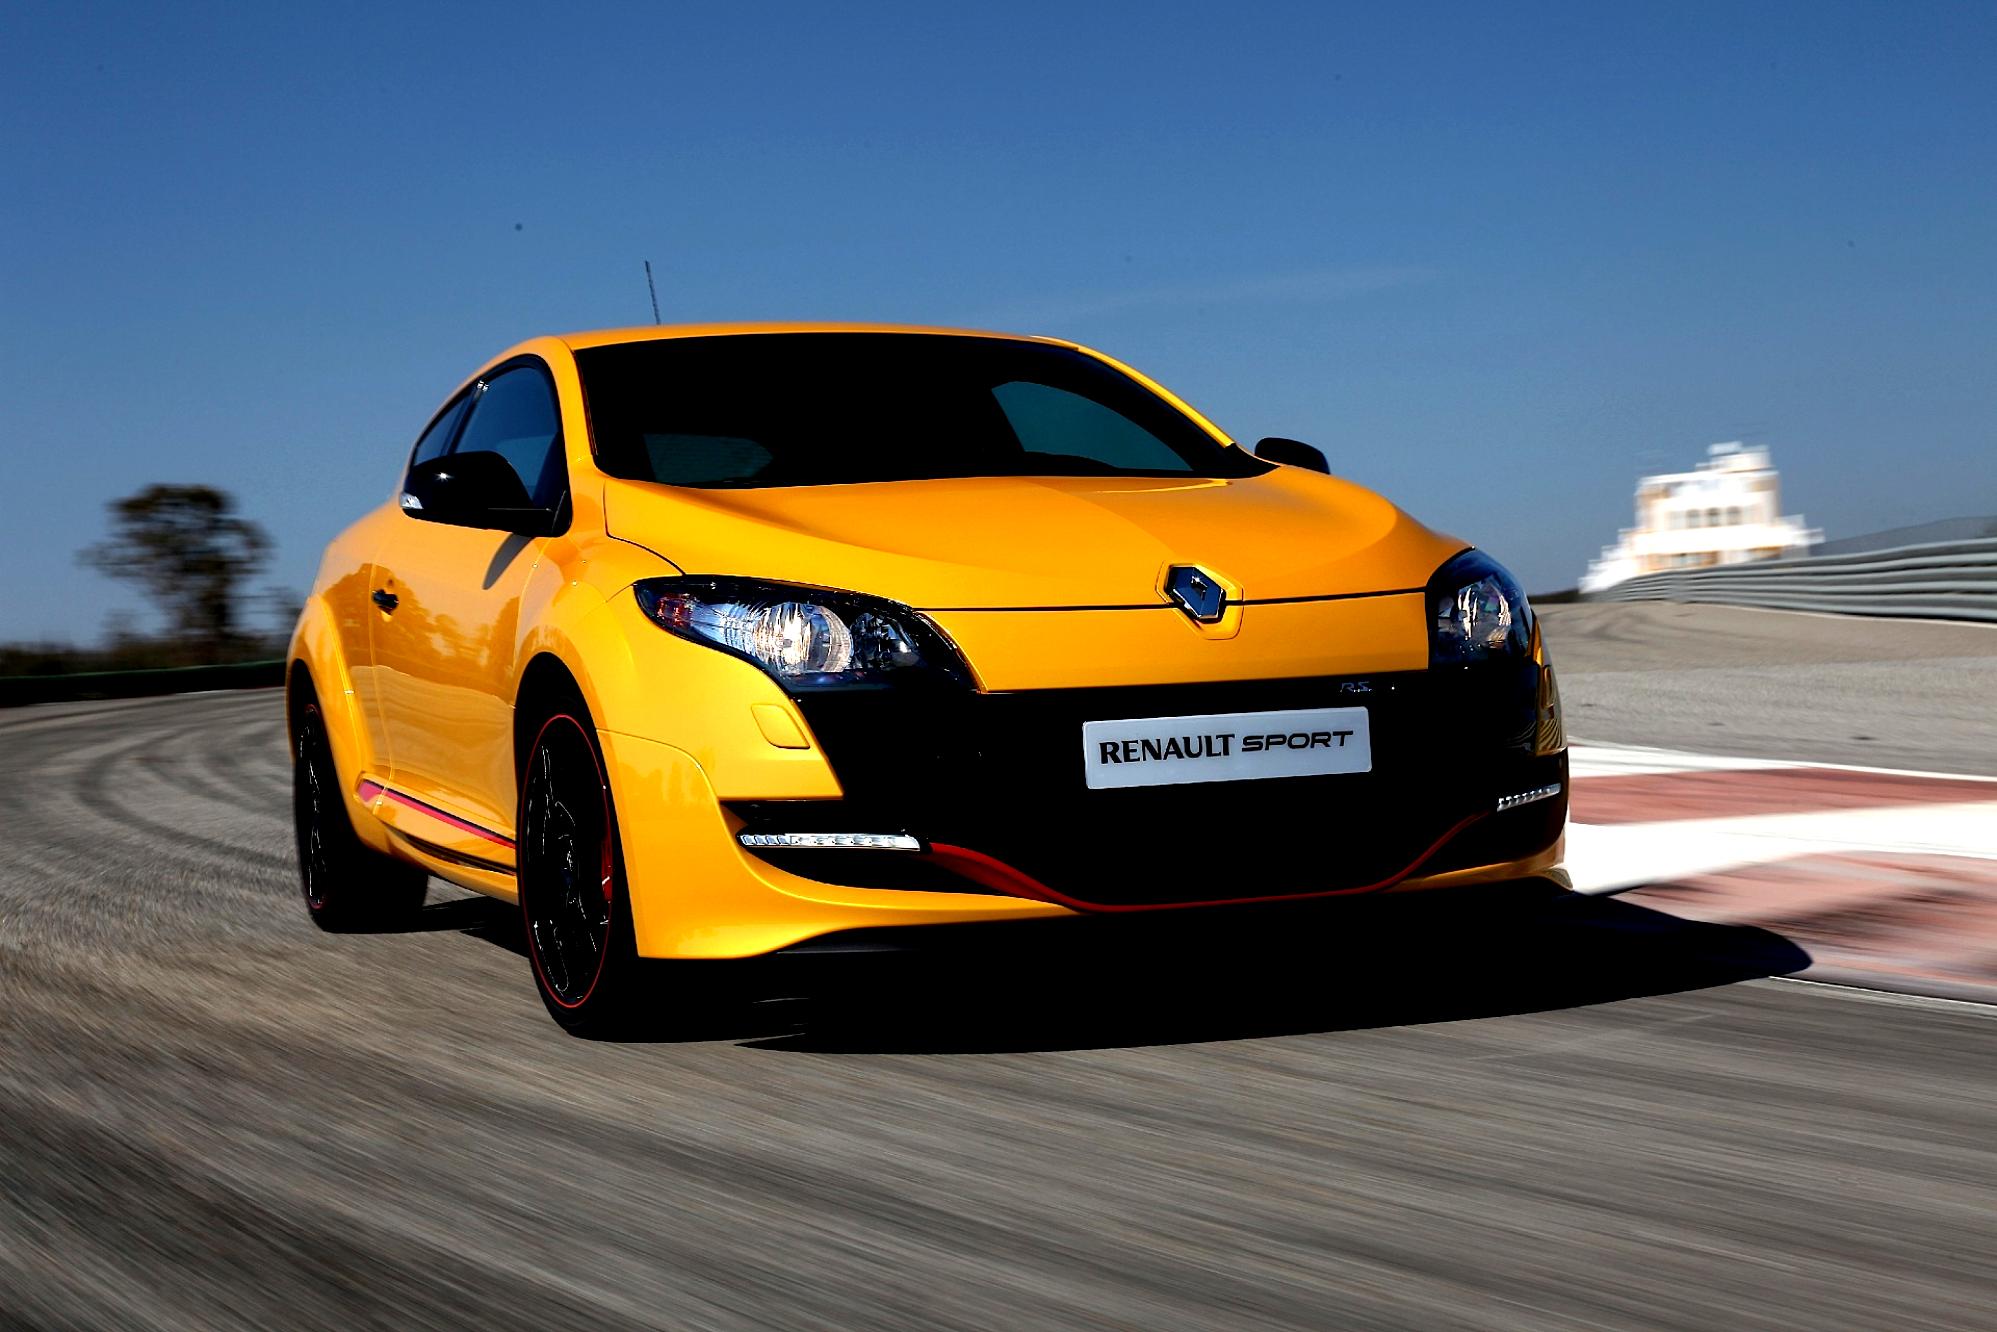 Renault Megane RS Coupe 2009 #60